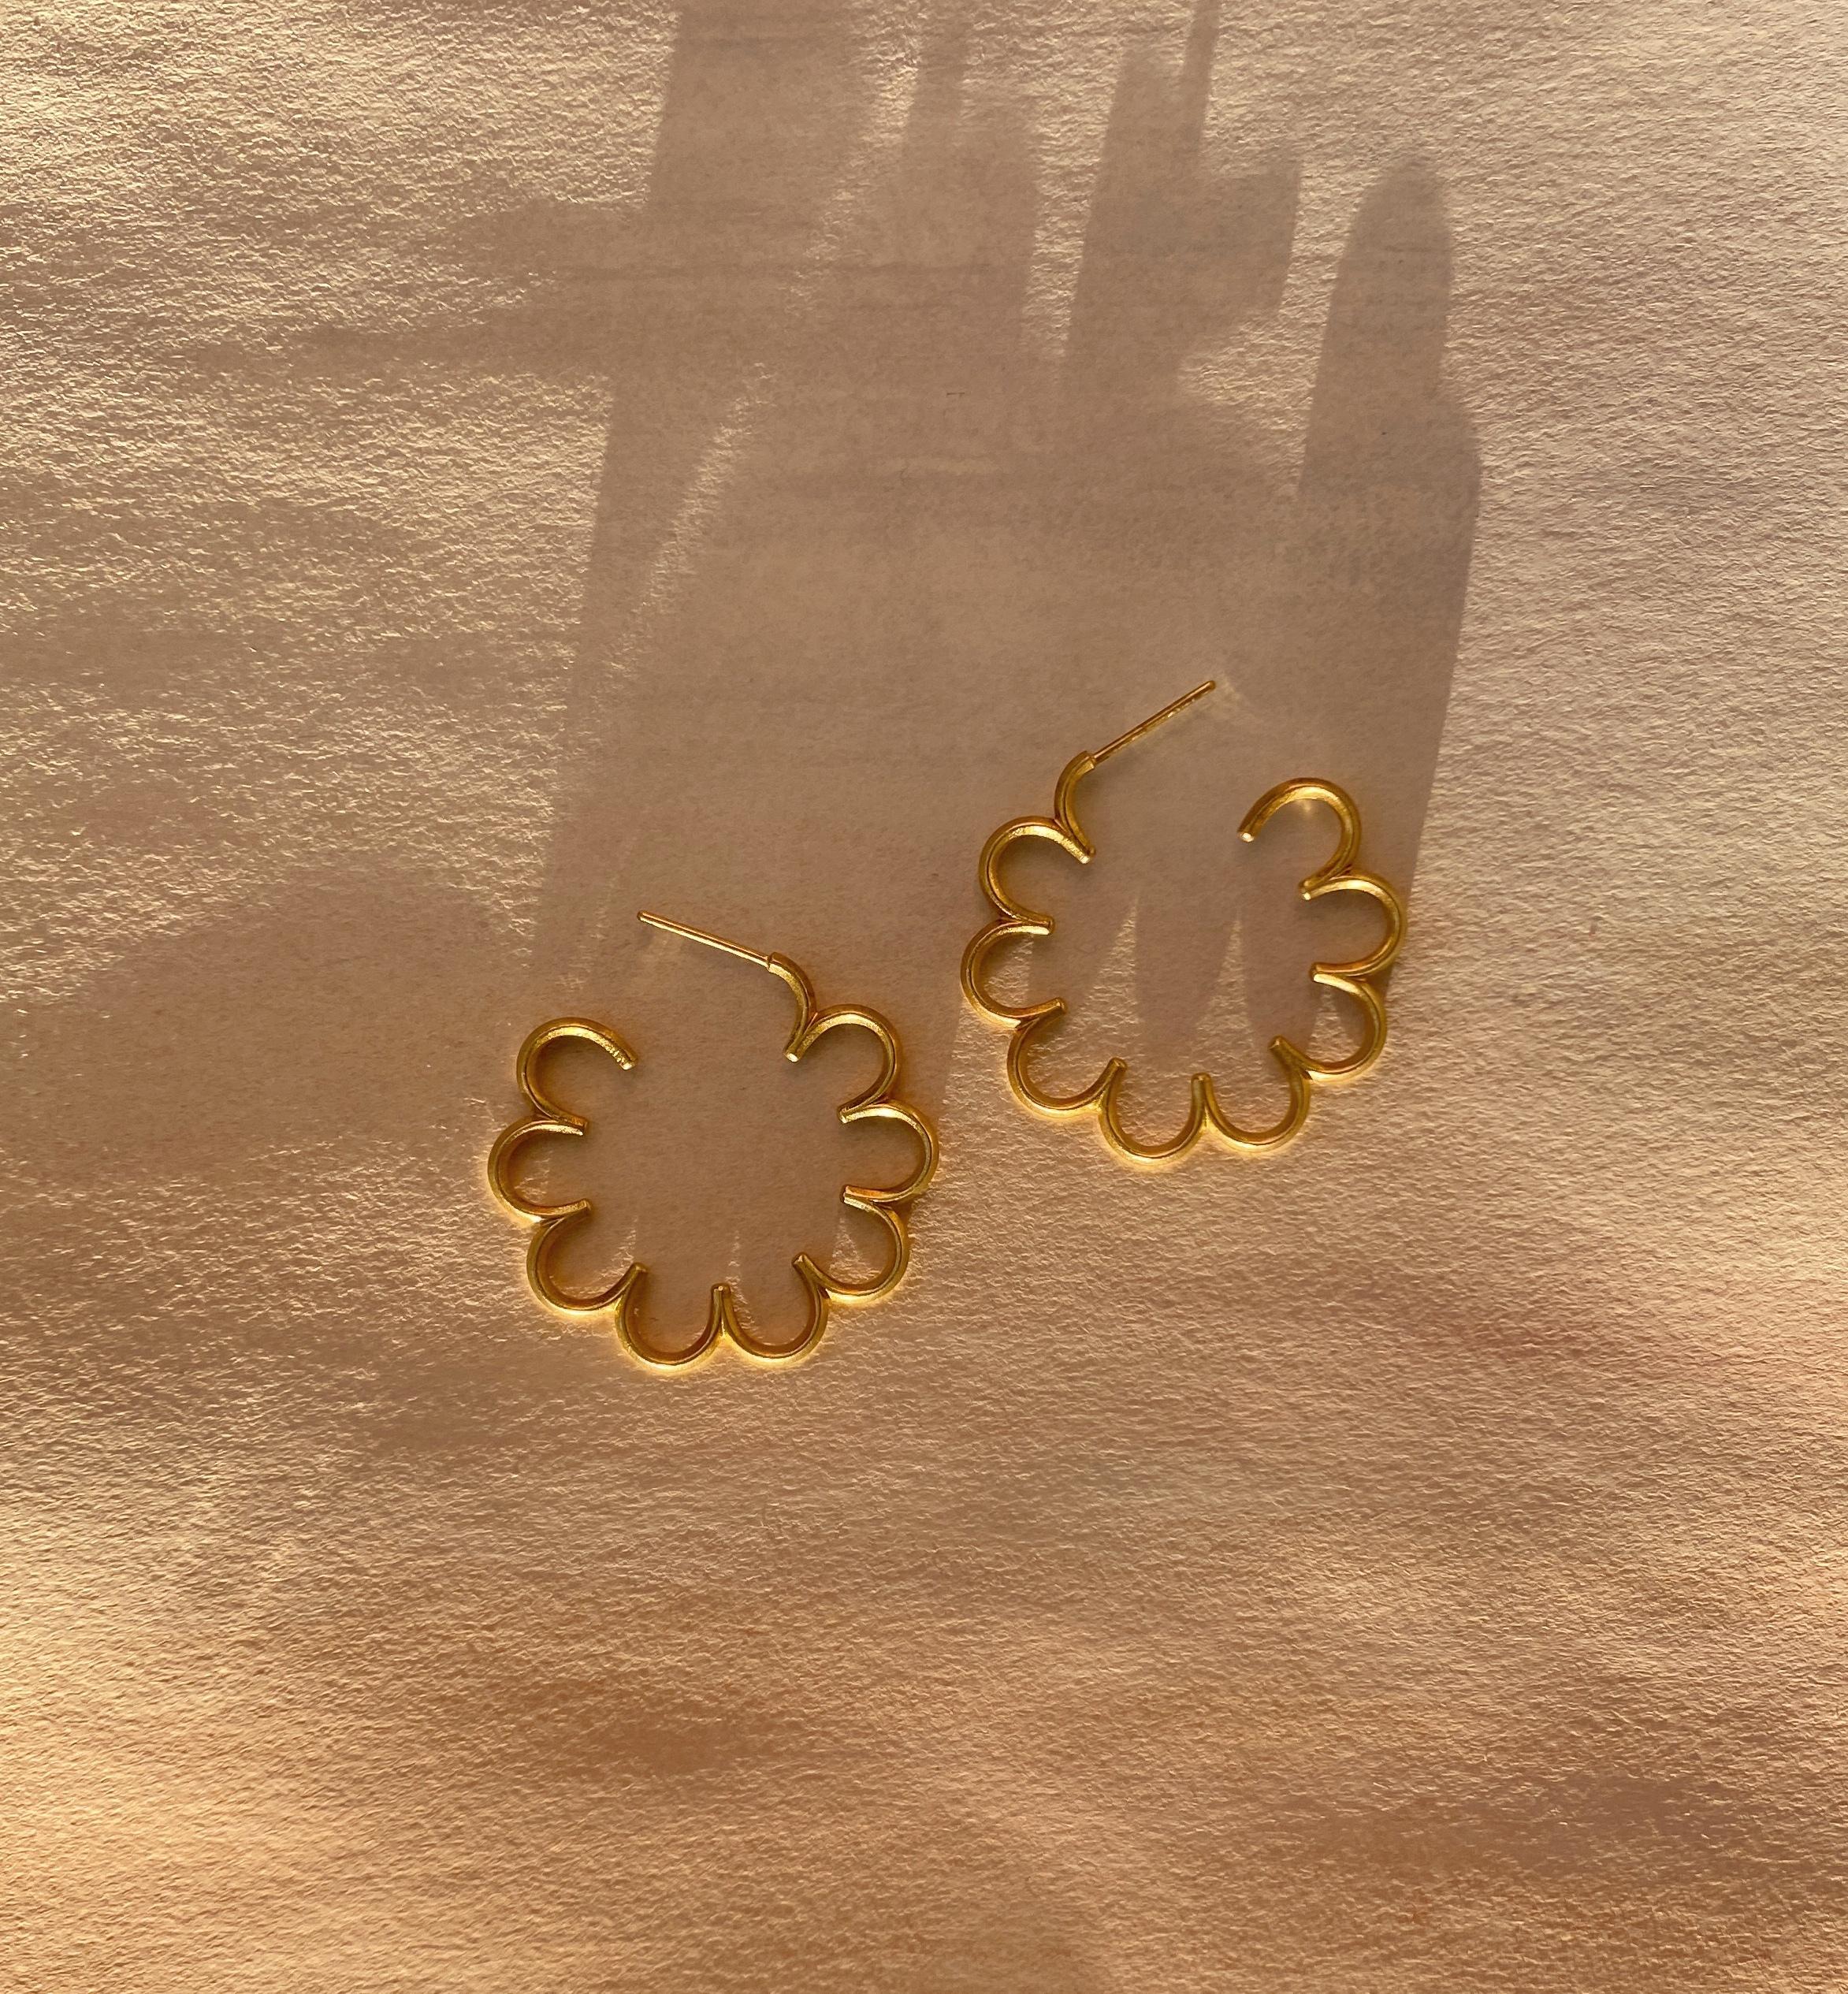  Earrings Hoops Medium Floral  Romantic 18K Gold-Plated Silver Greek Earrings In New Condition For Sale In Athens, GR